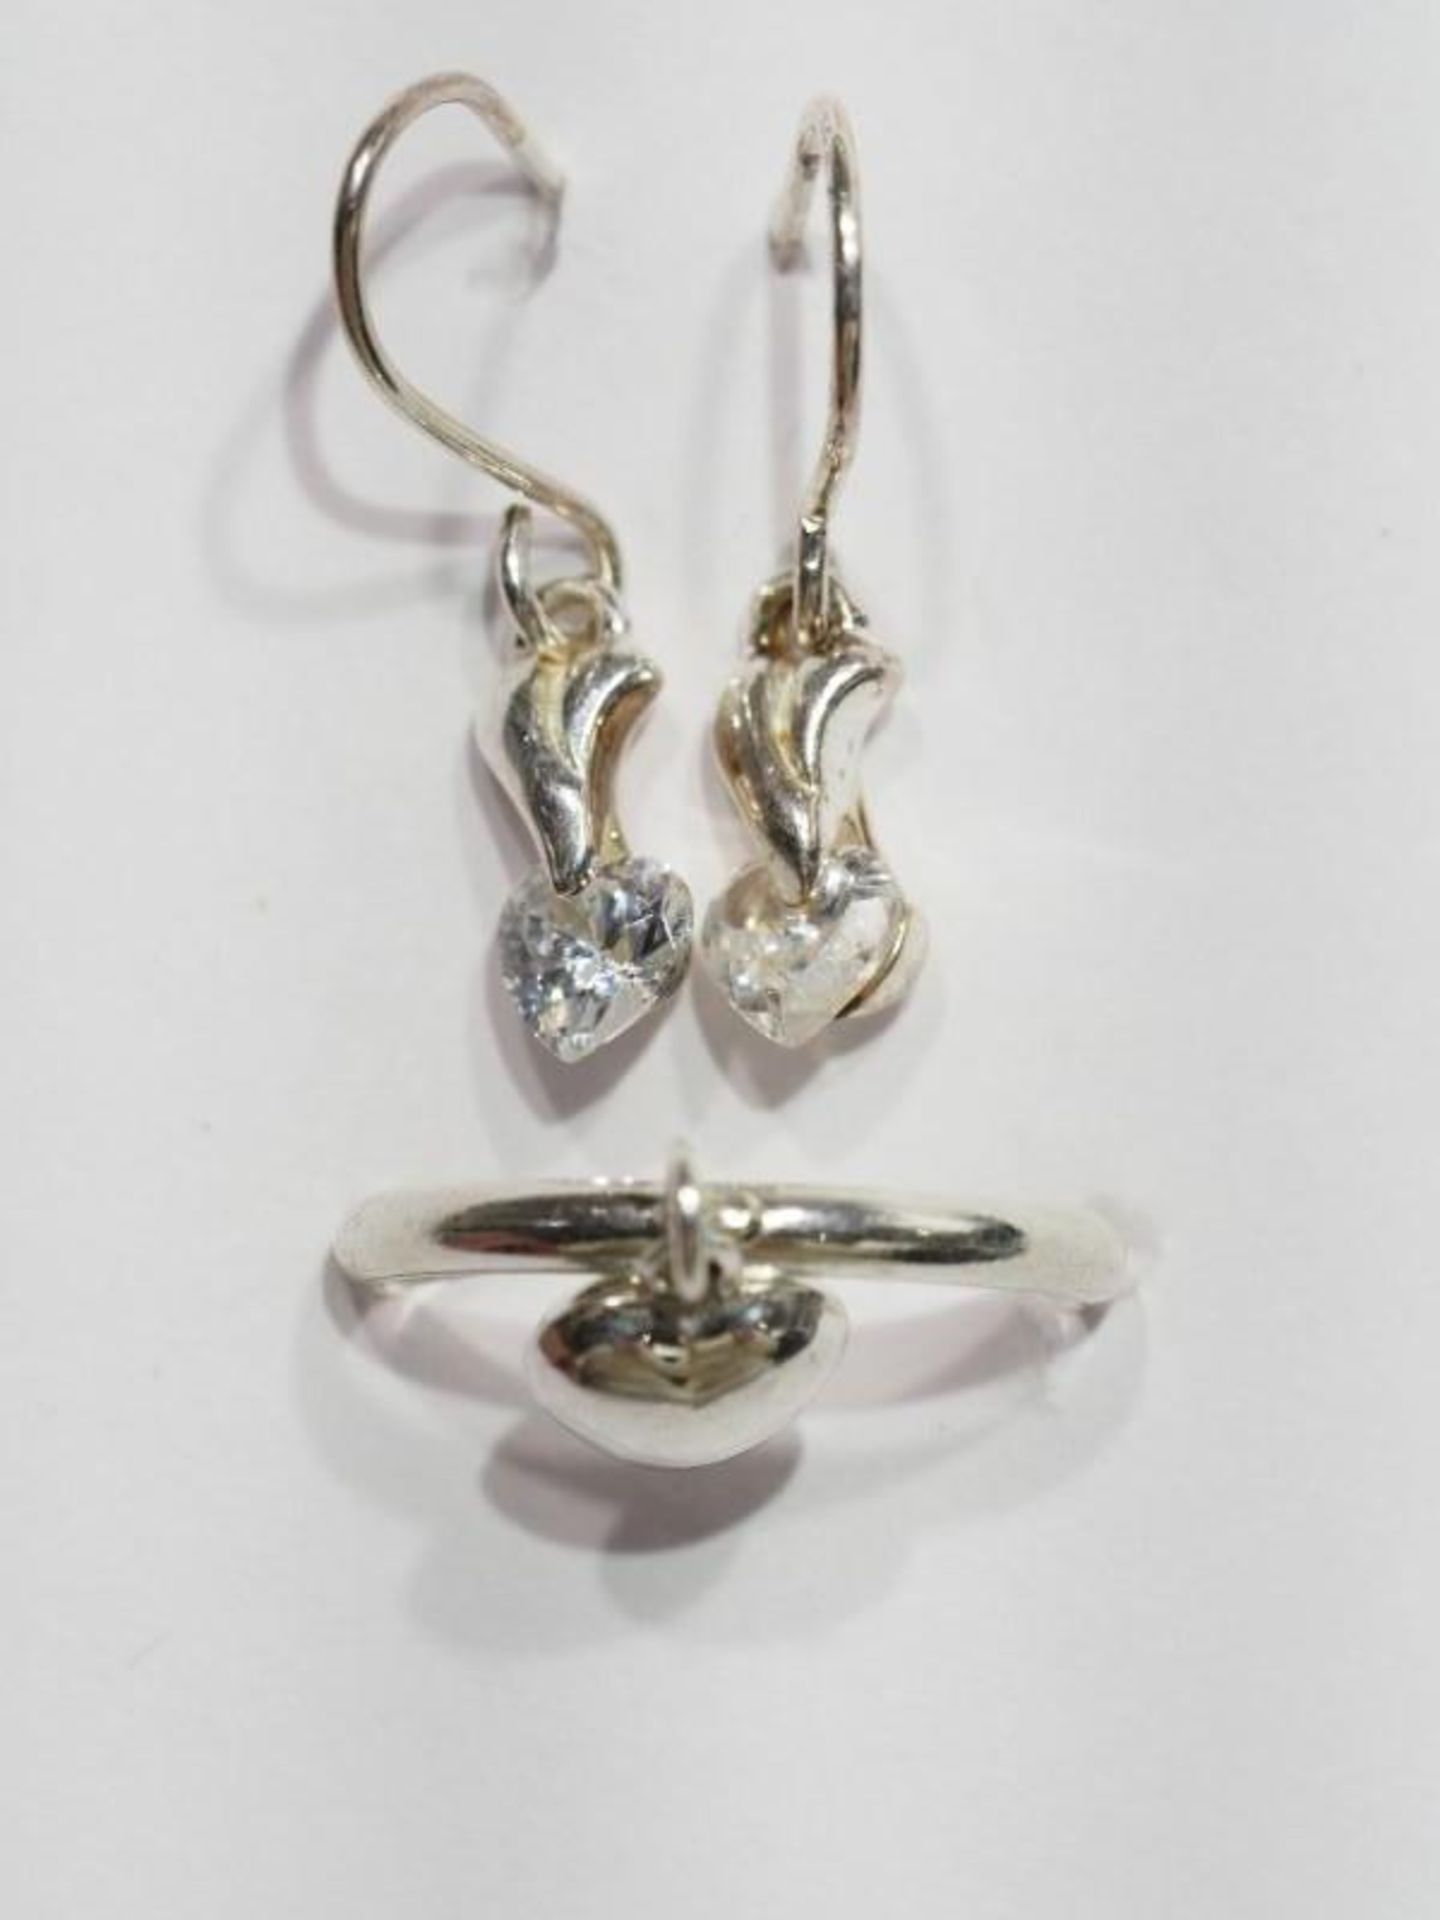 Sterling Silver Cubic Zirconia Earrings, Heart shaped Earrings and Ring. Retail $200 (93-GC29)